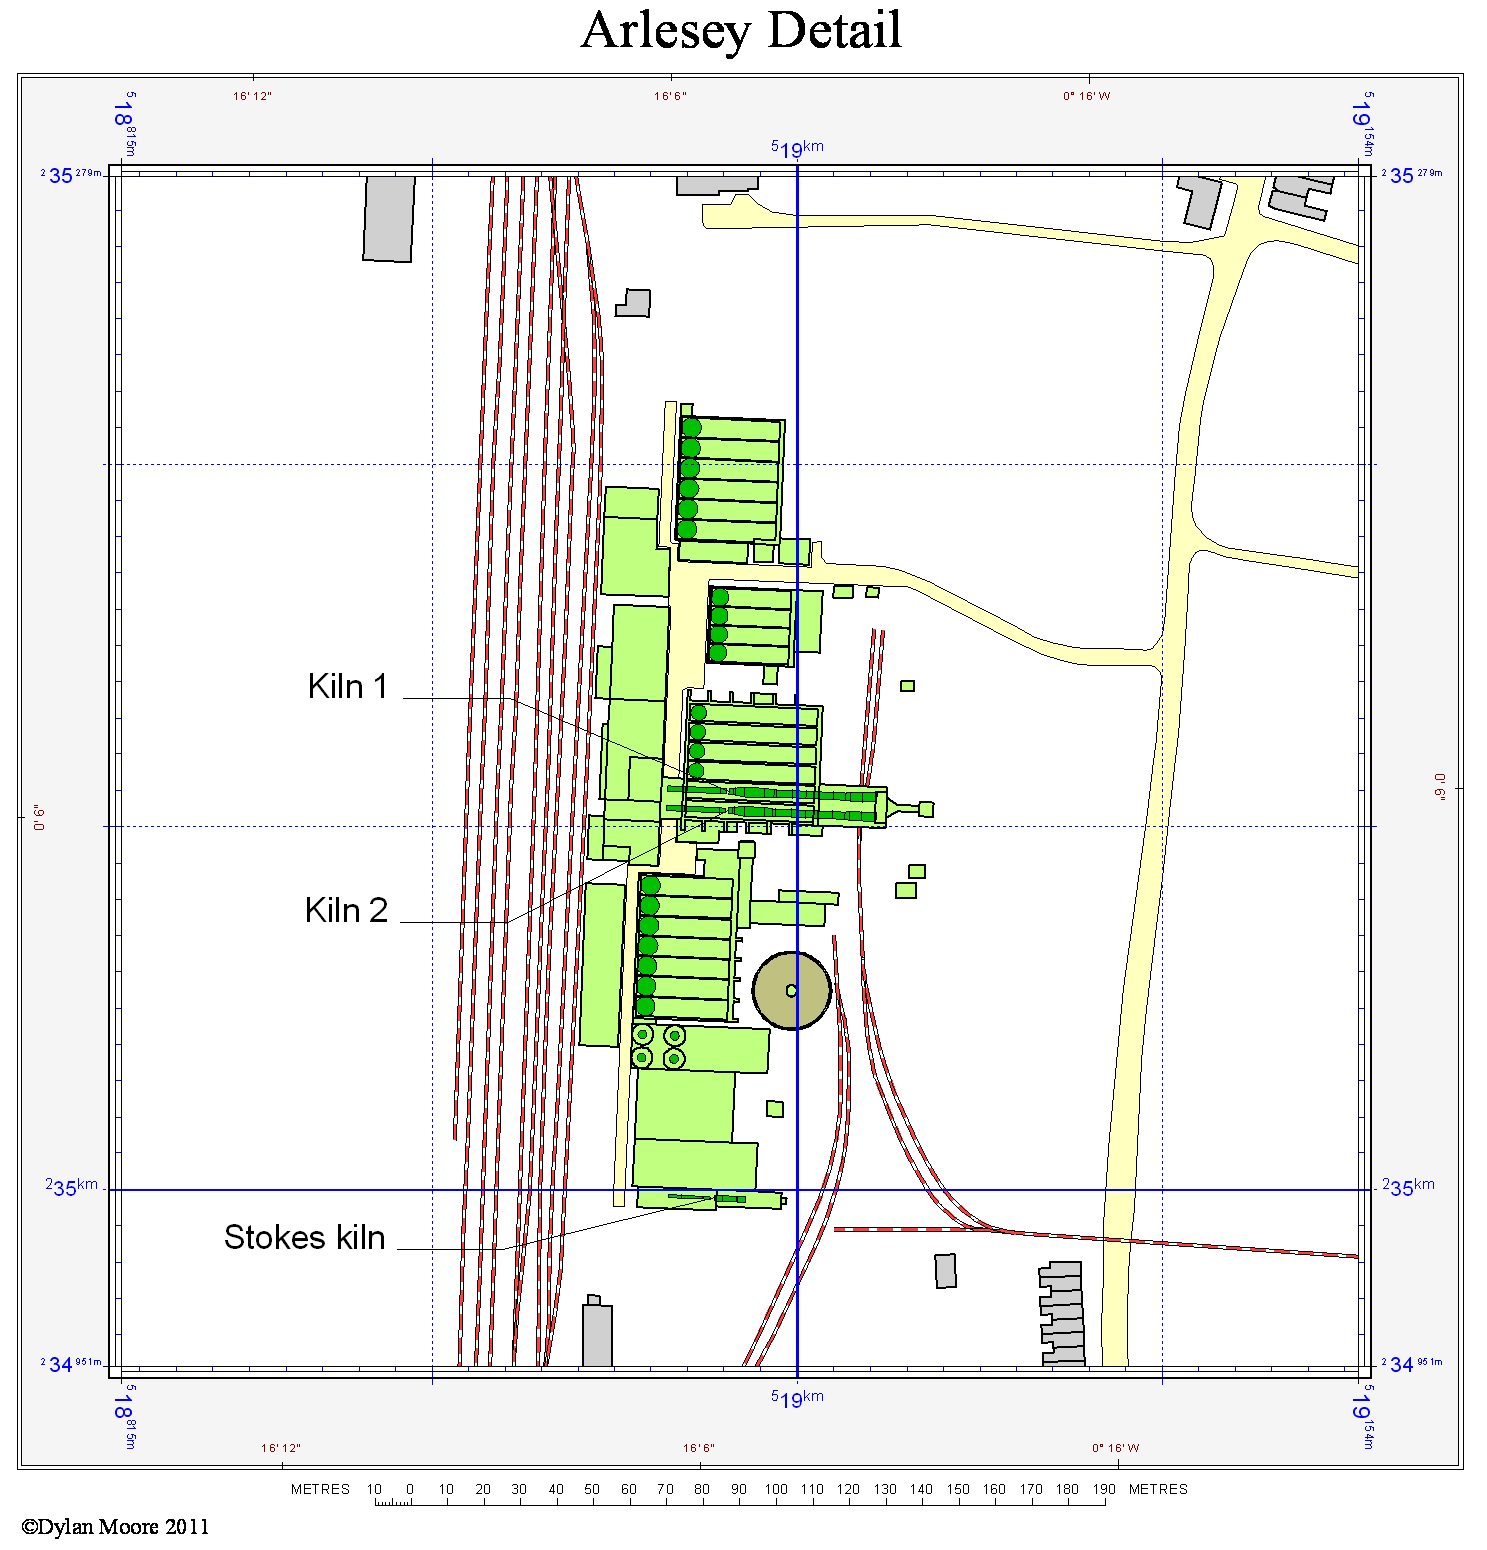 Arlesey cement layout map